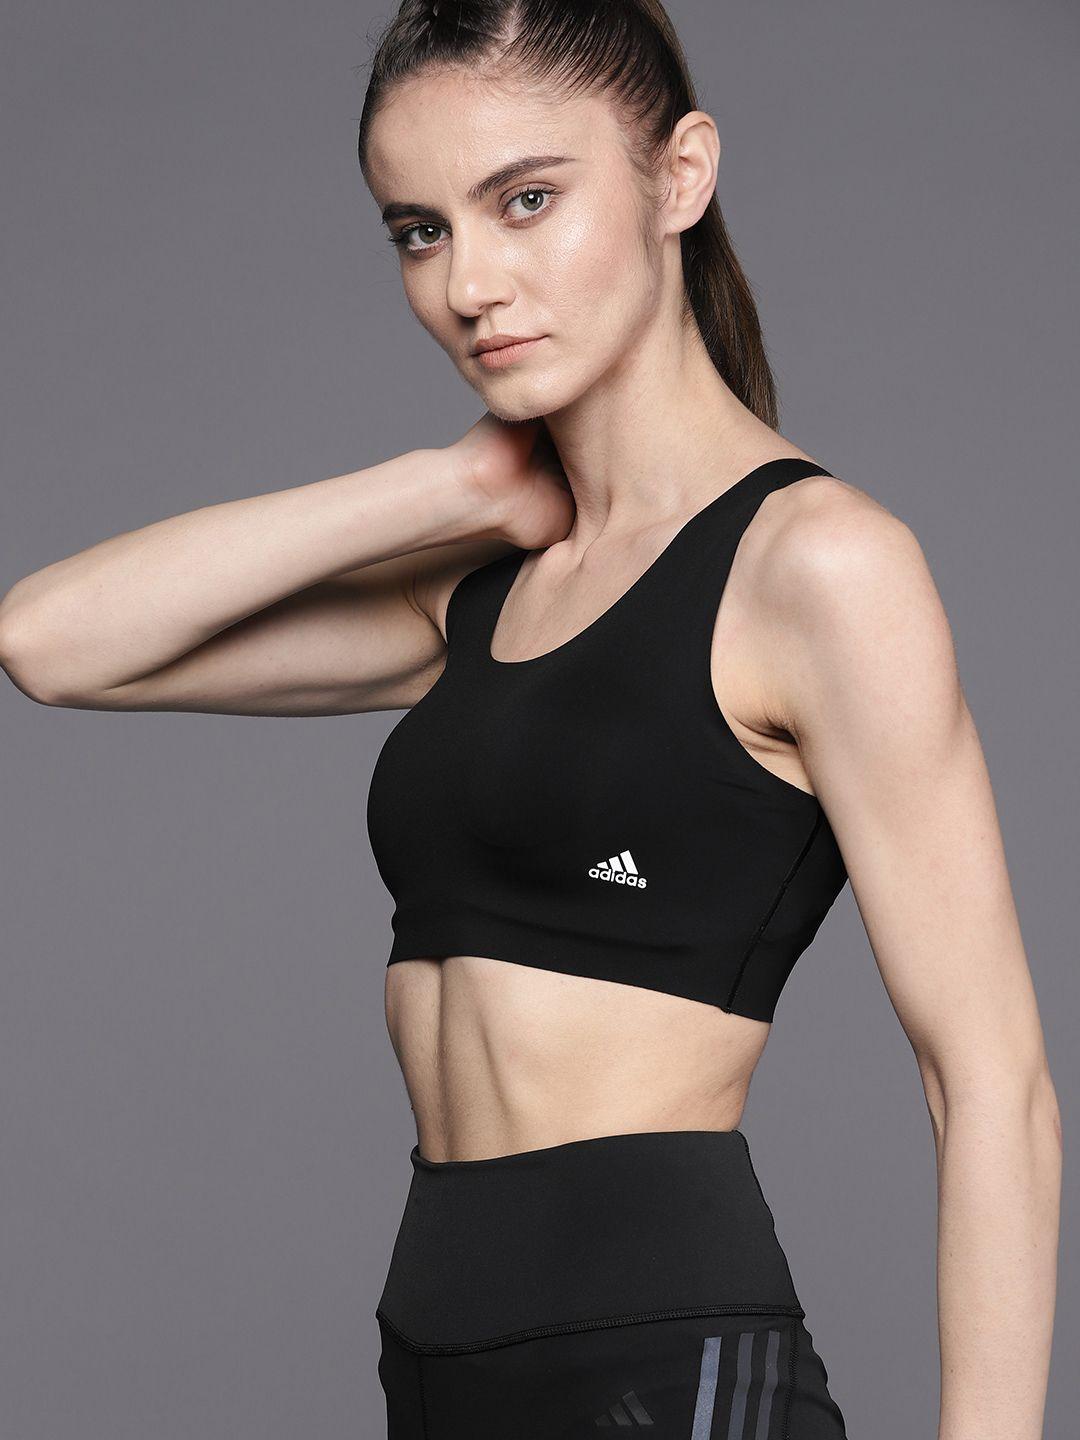 adidas pure lounge everyday light-support workout removable padding bra